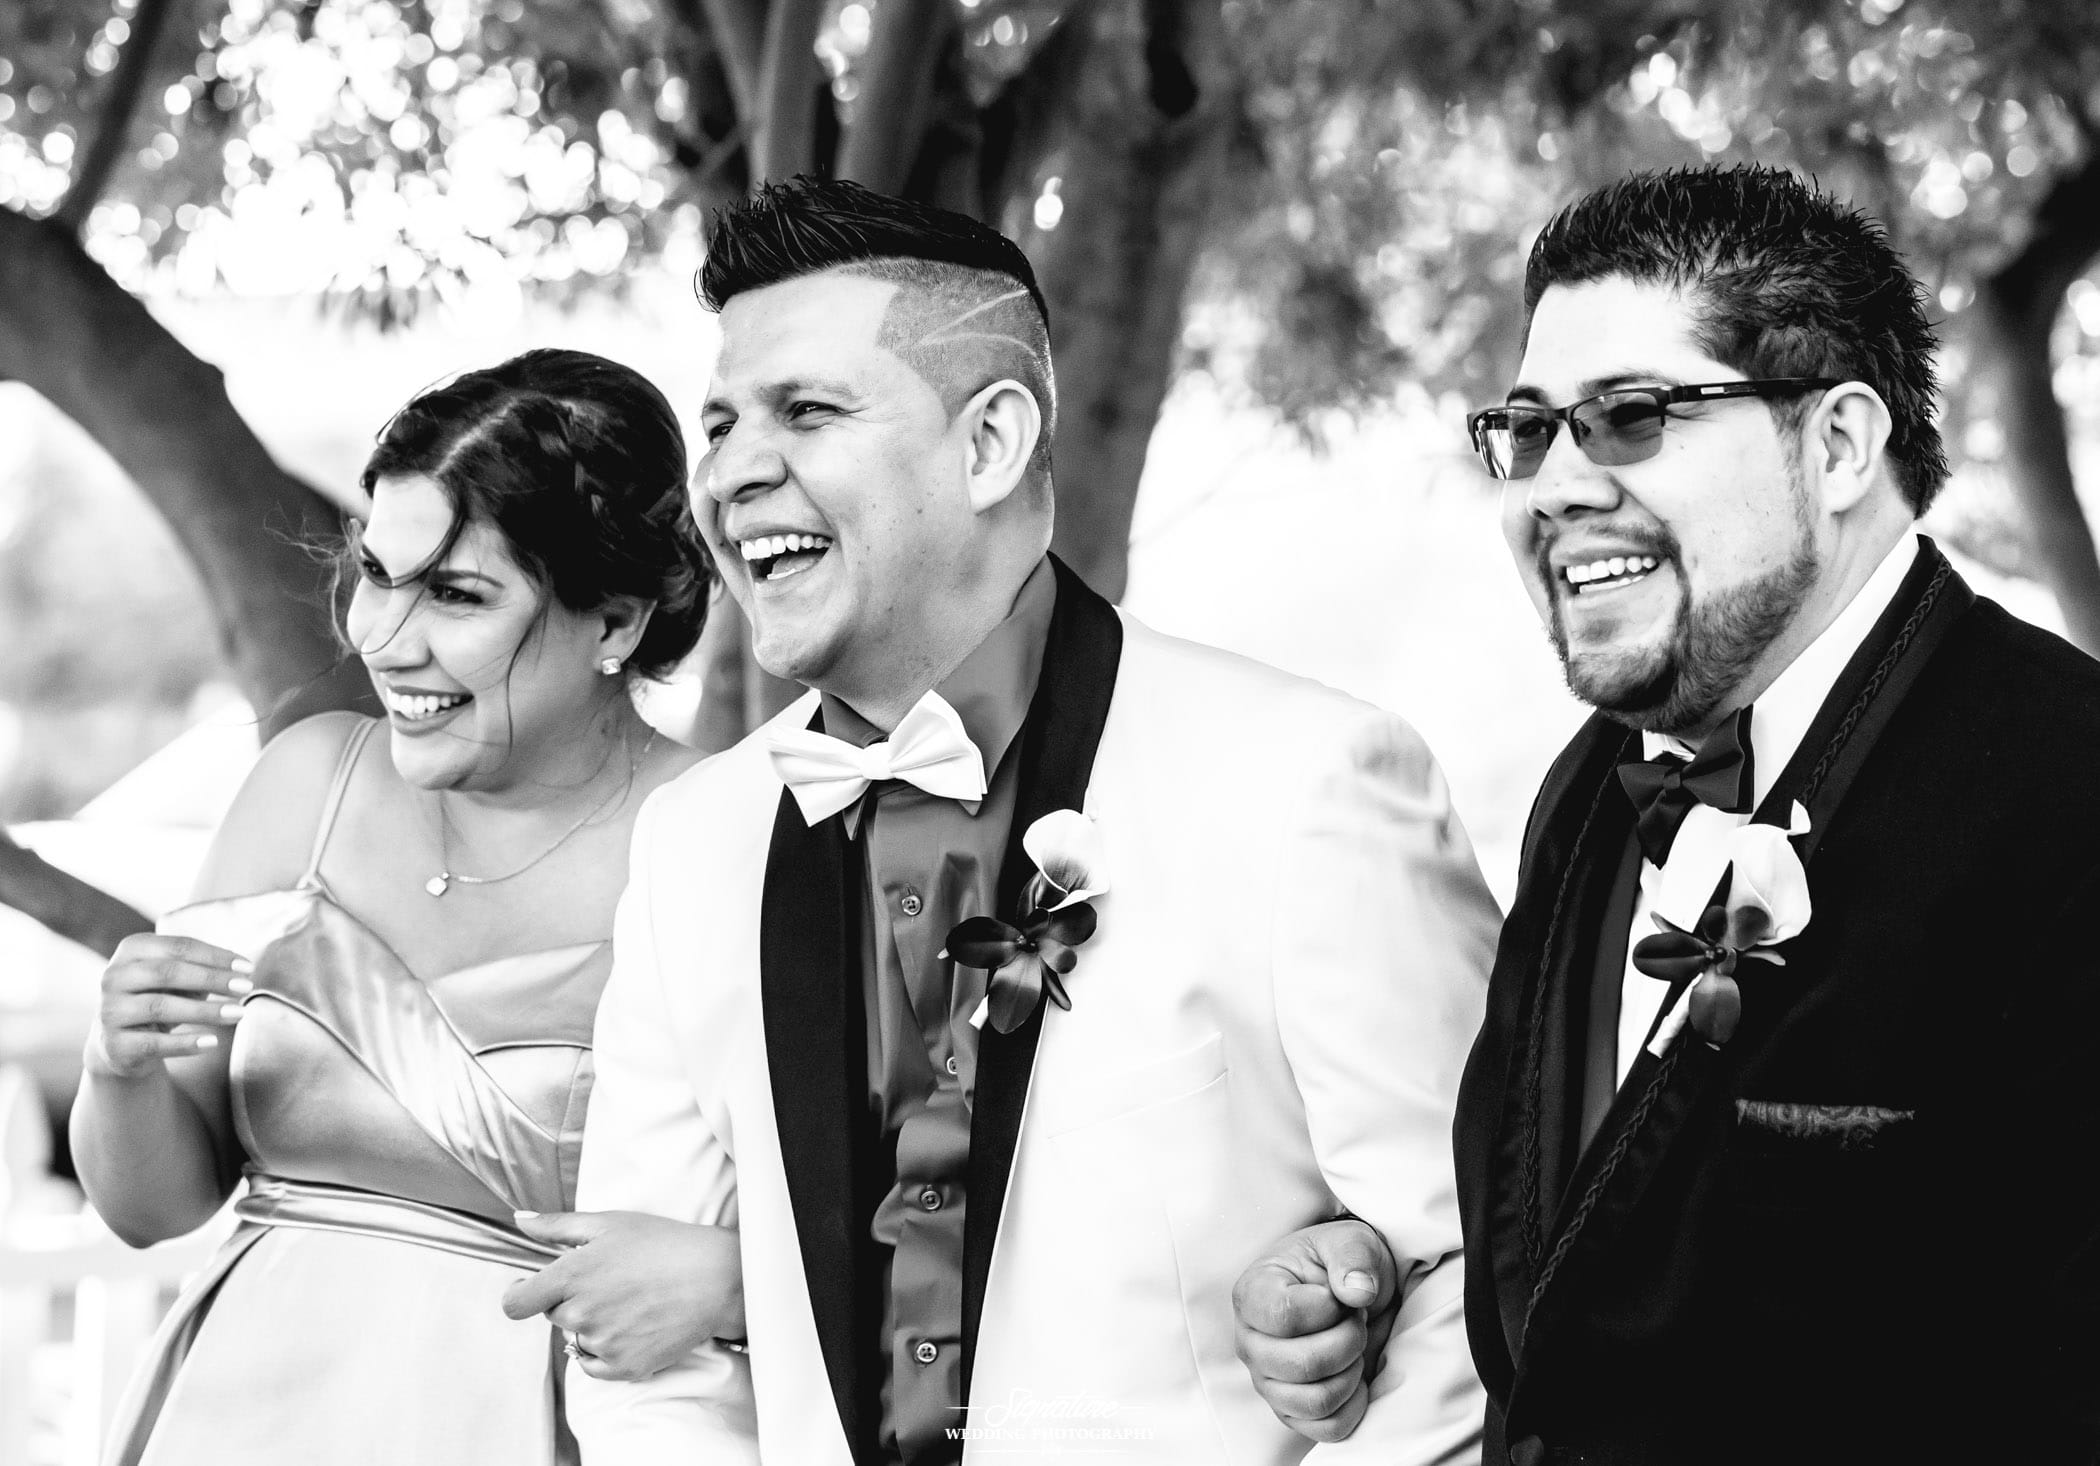 Groom with wedding party members candid black and white